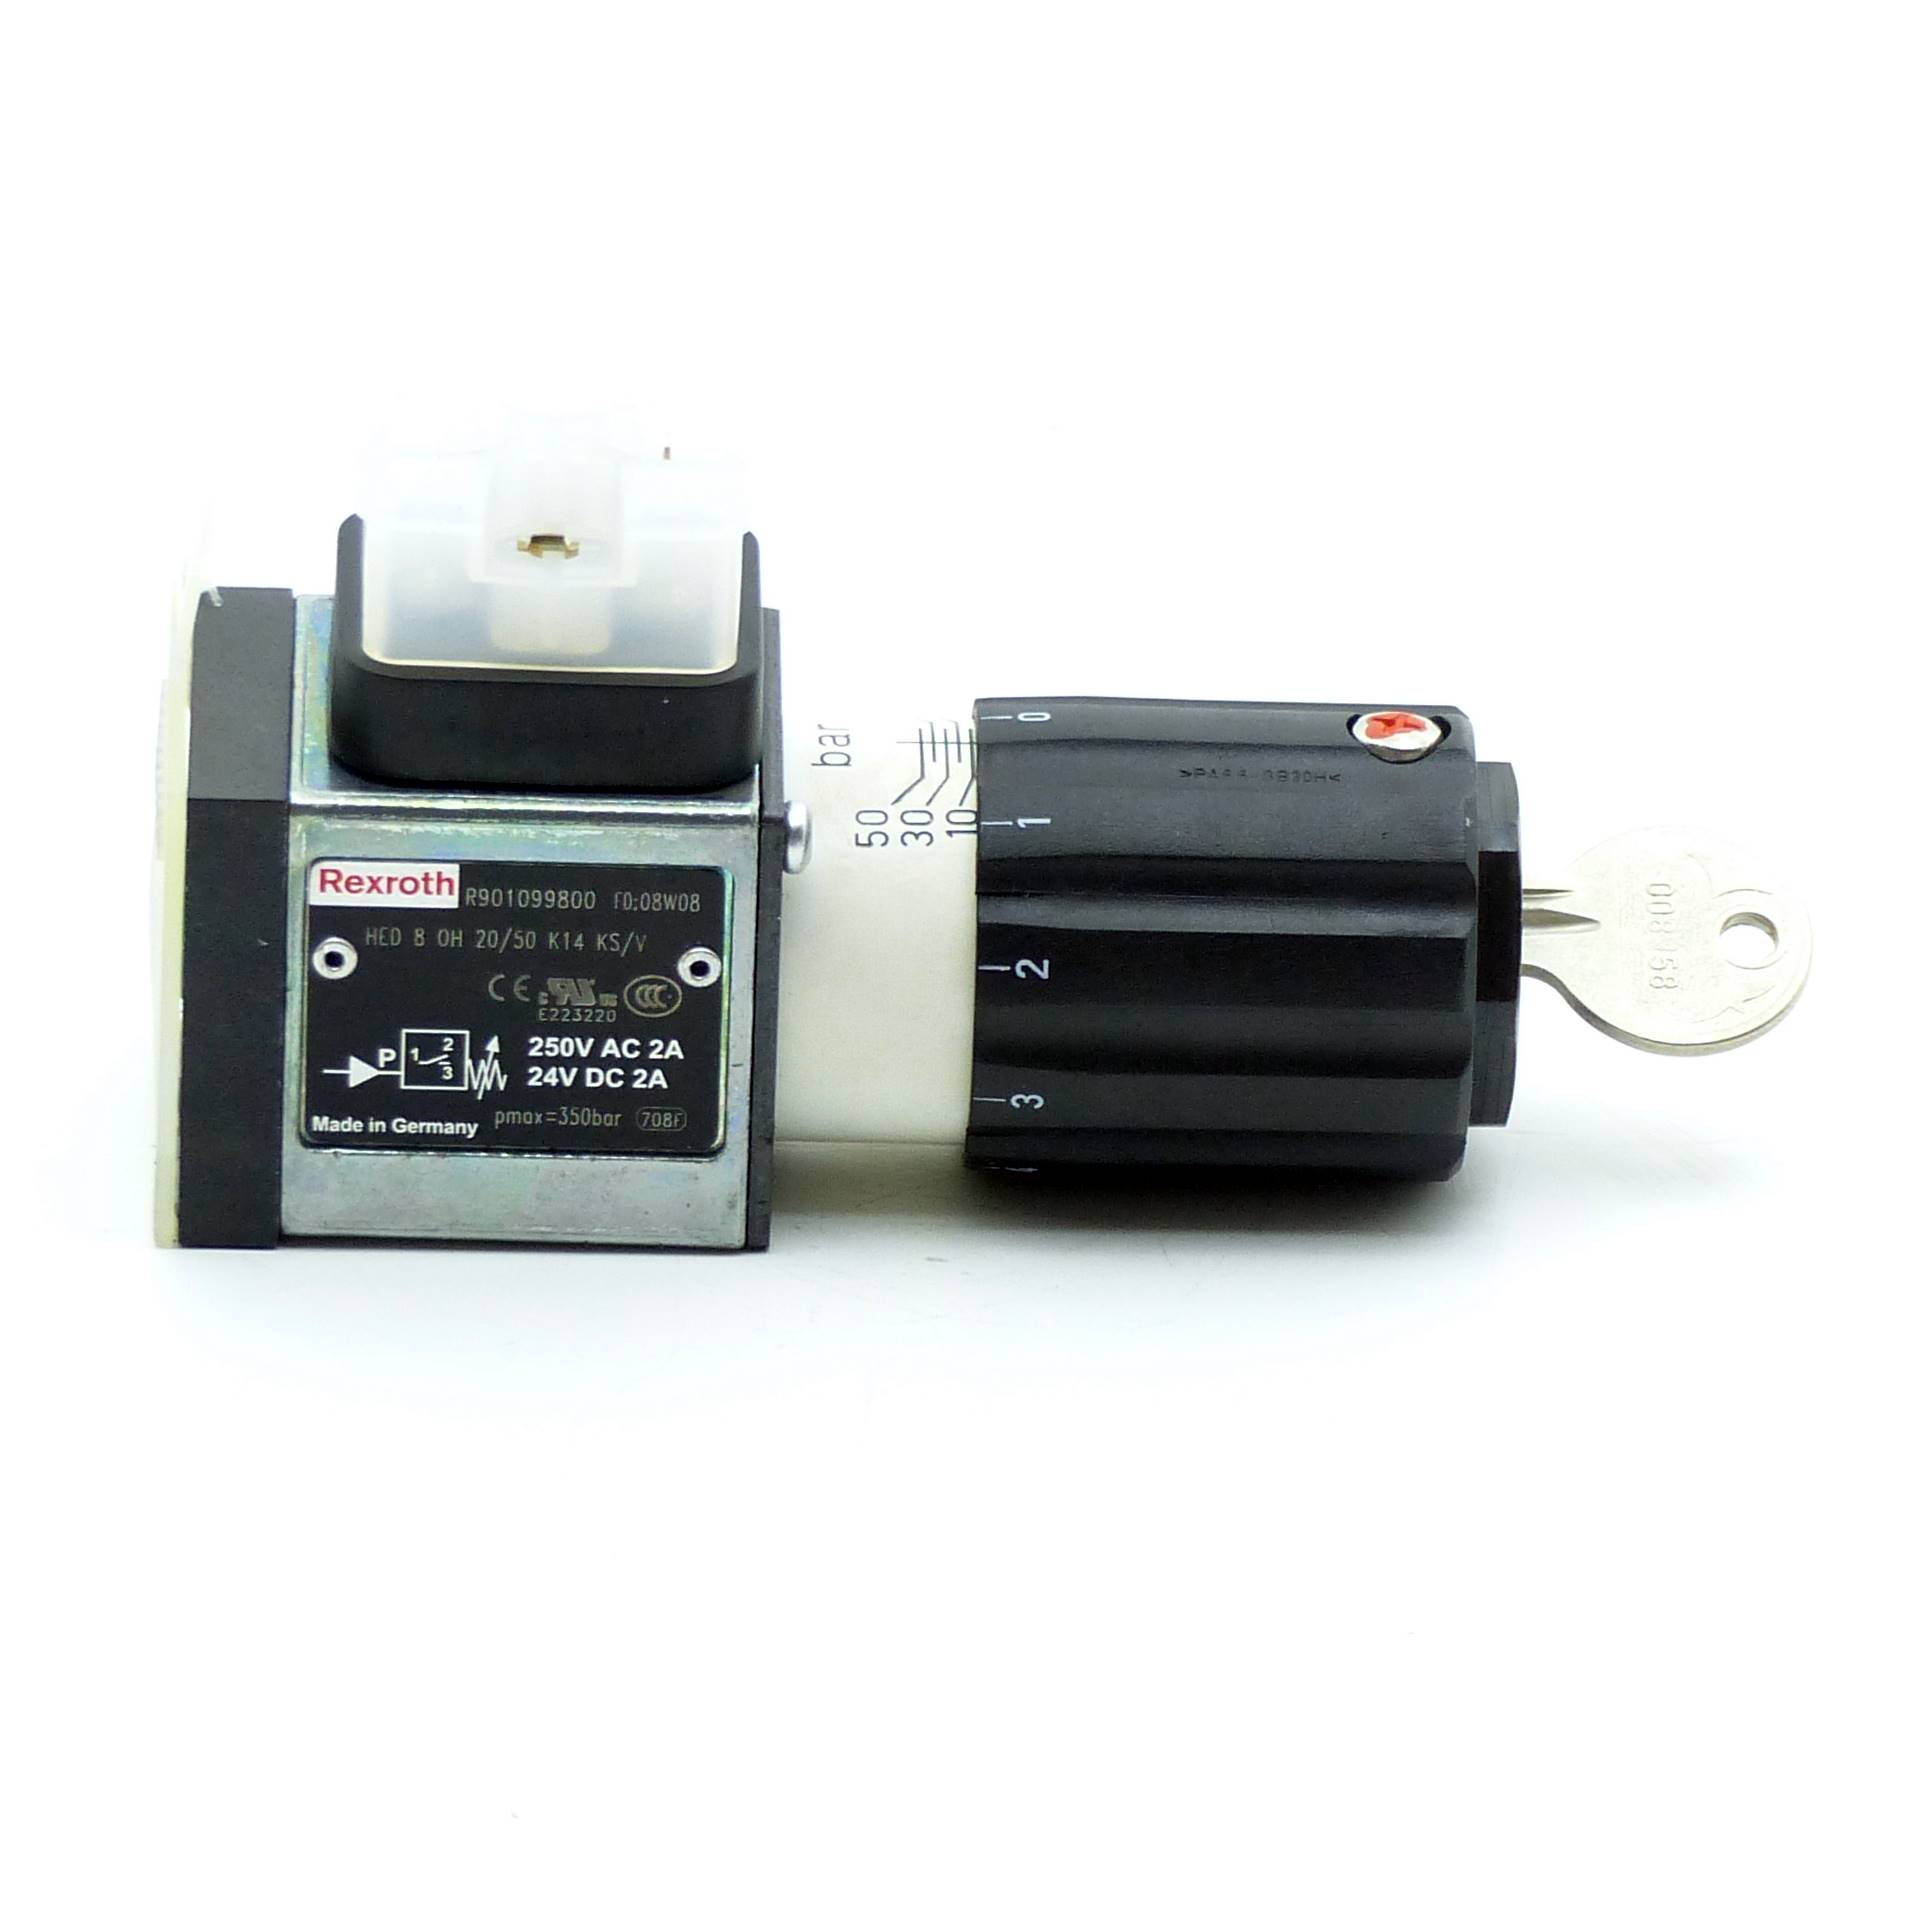 Pressure Switch HED 8 OH 20/50 K14/V 